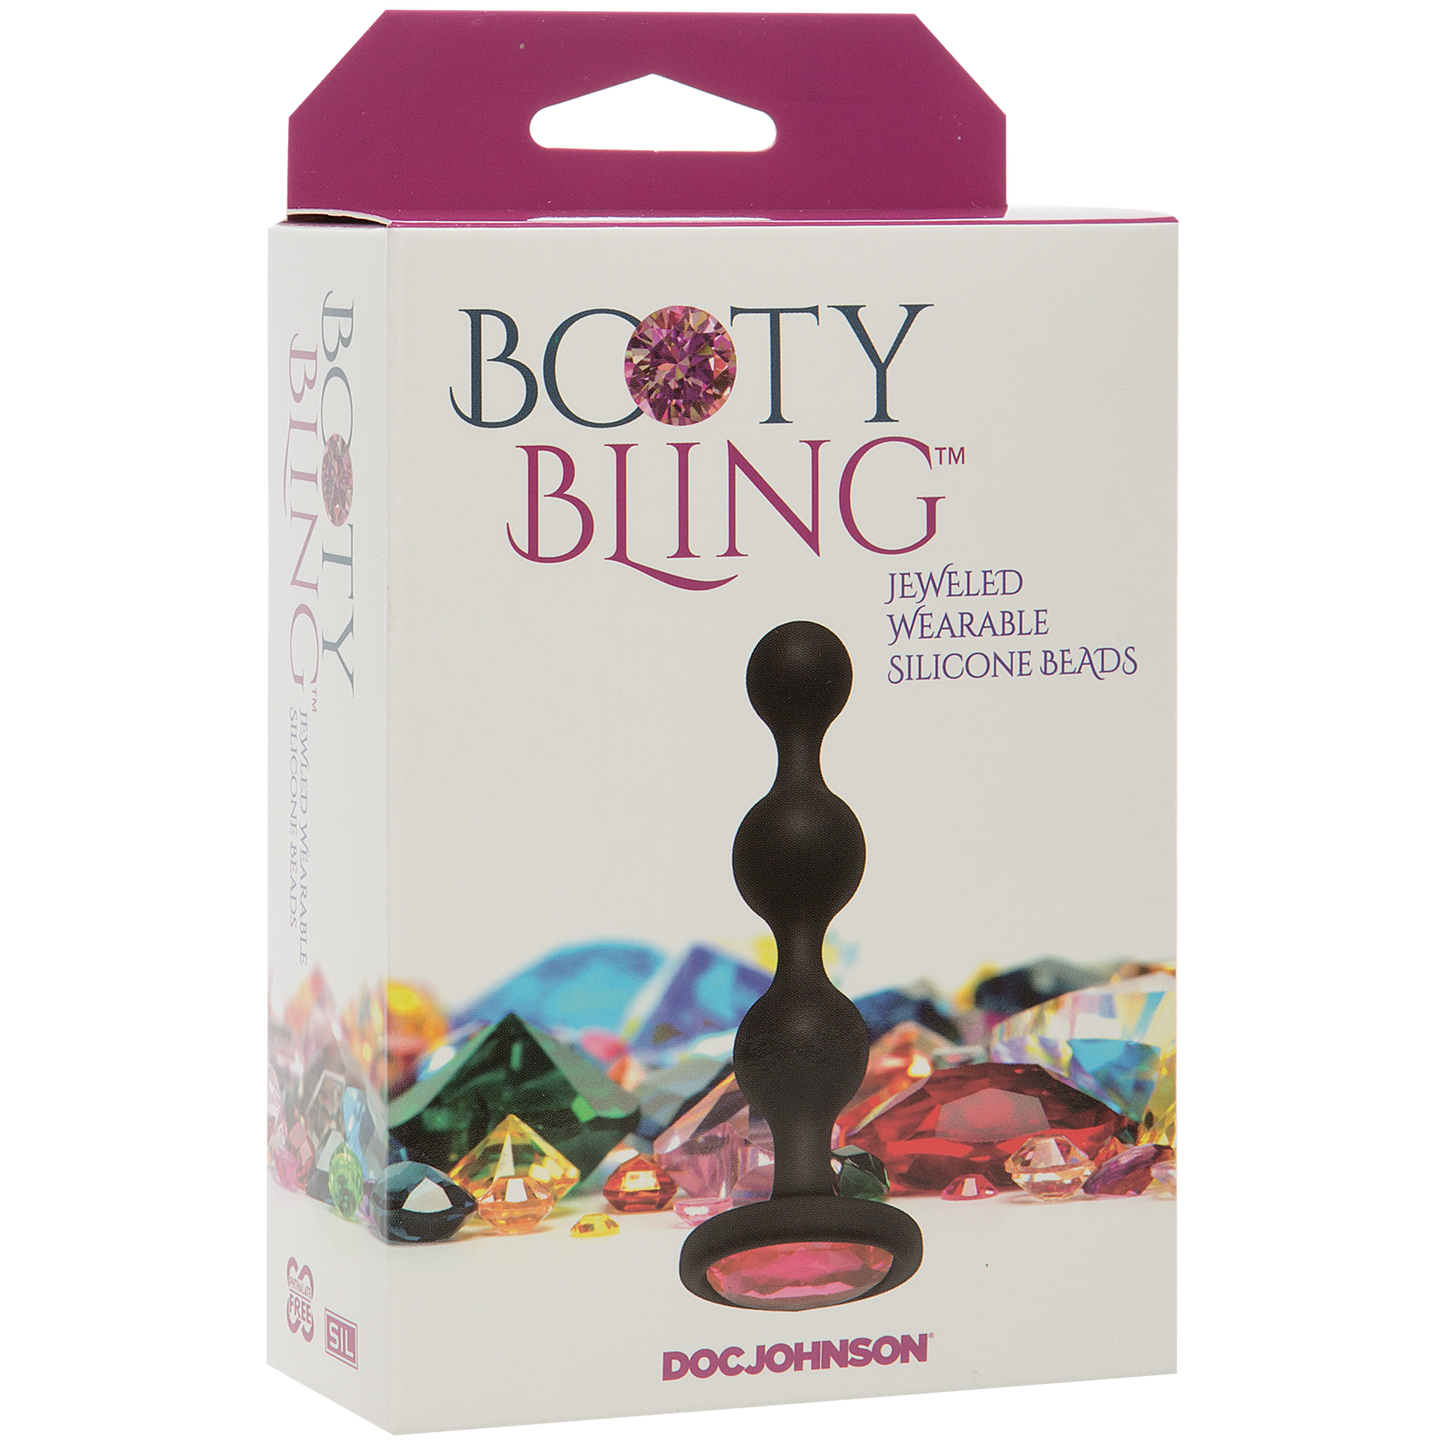 Booty Bling Wearable Silicone Beads - Pink - Thorn & Feather Sex Toy Canada